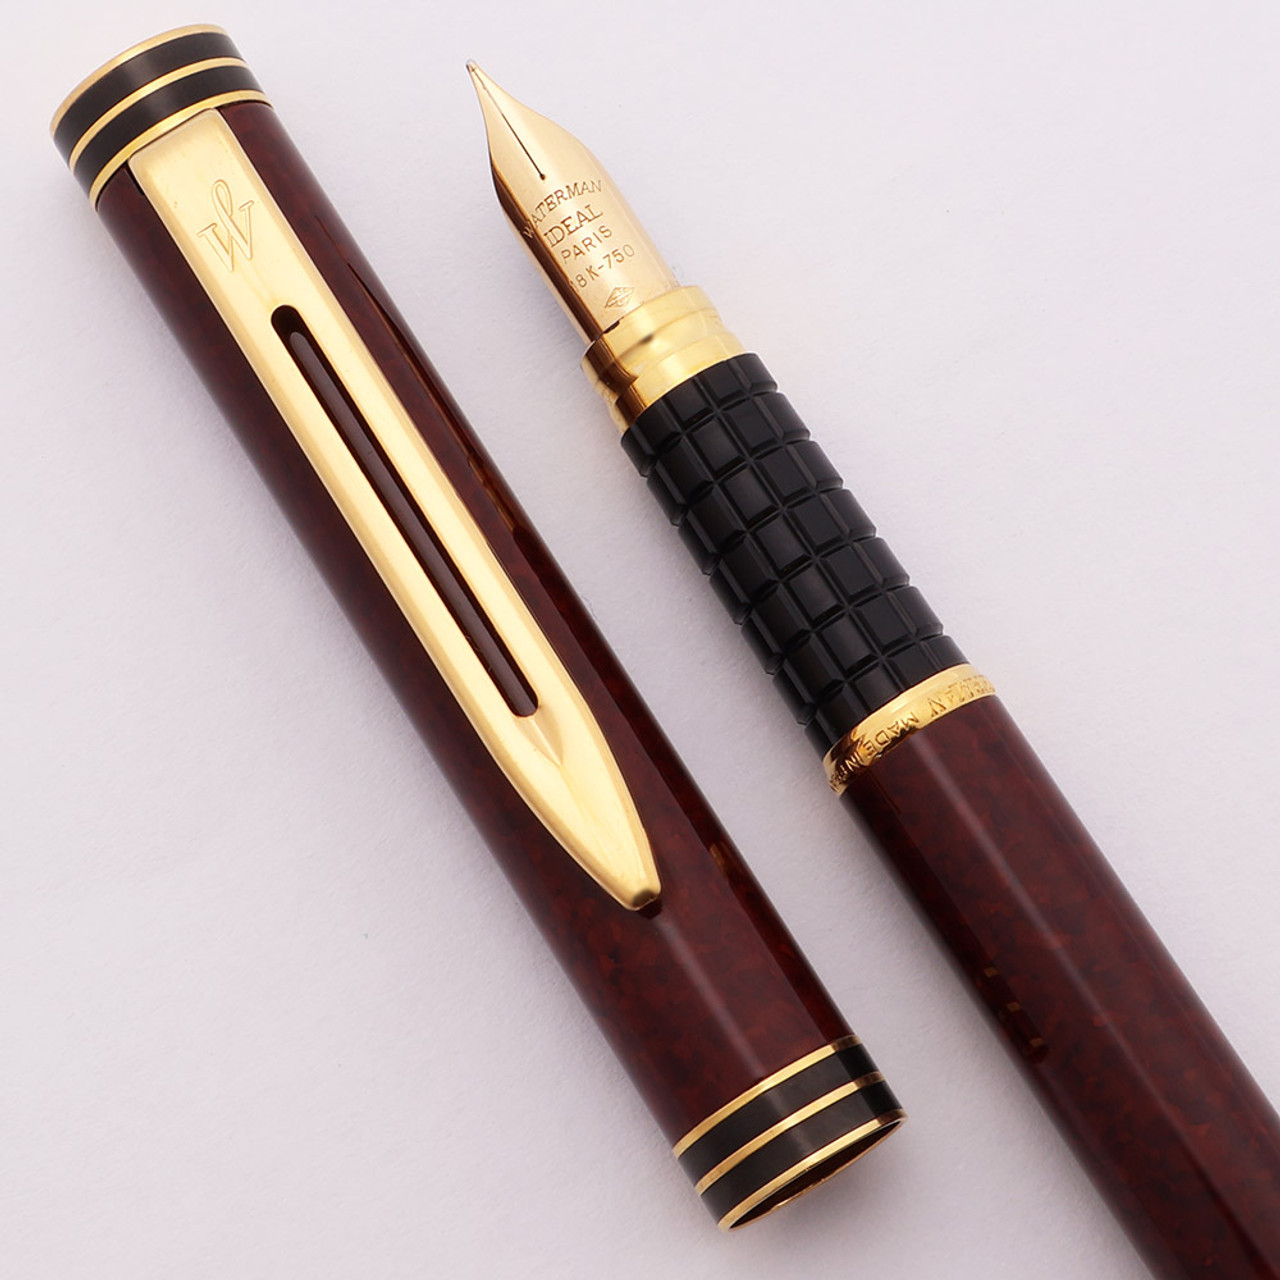 Waterman Exclusive Fountain Pen (1980s/90s) - Burgundy Mottled, C/C, Fine 18k Ideal Nib (Excellent, Works Well)